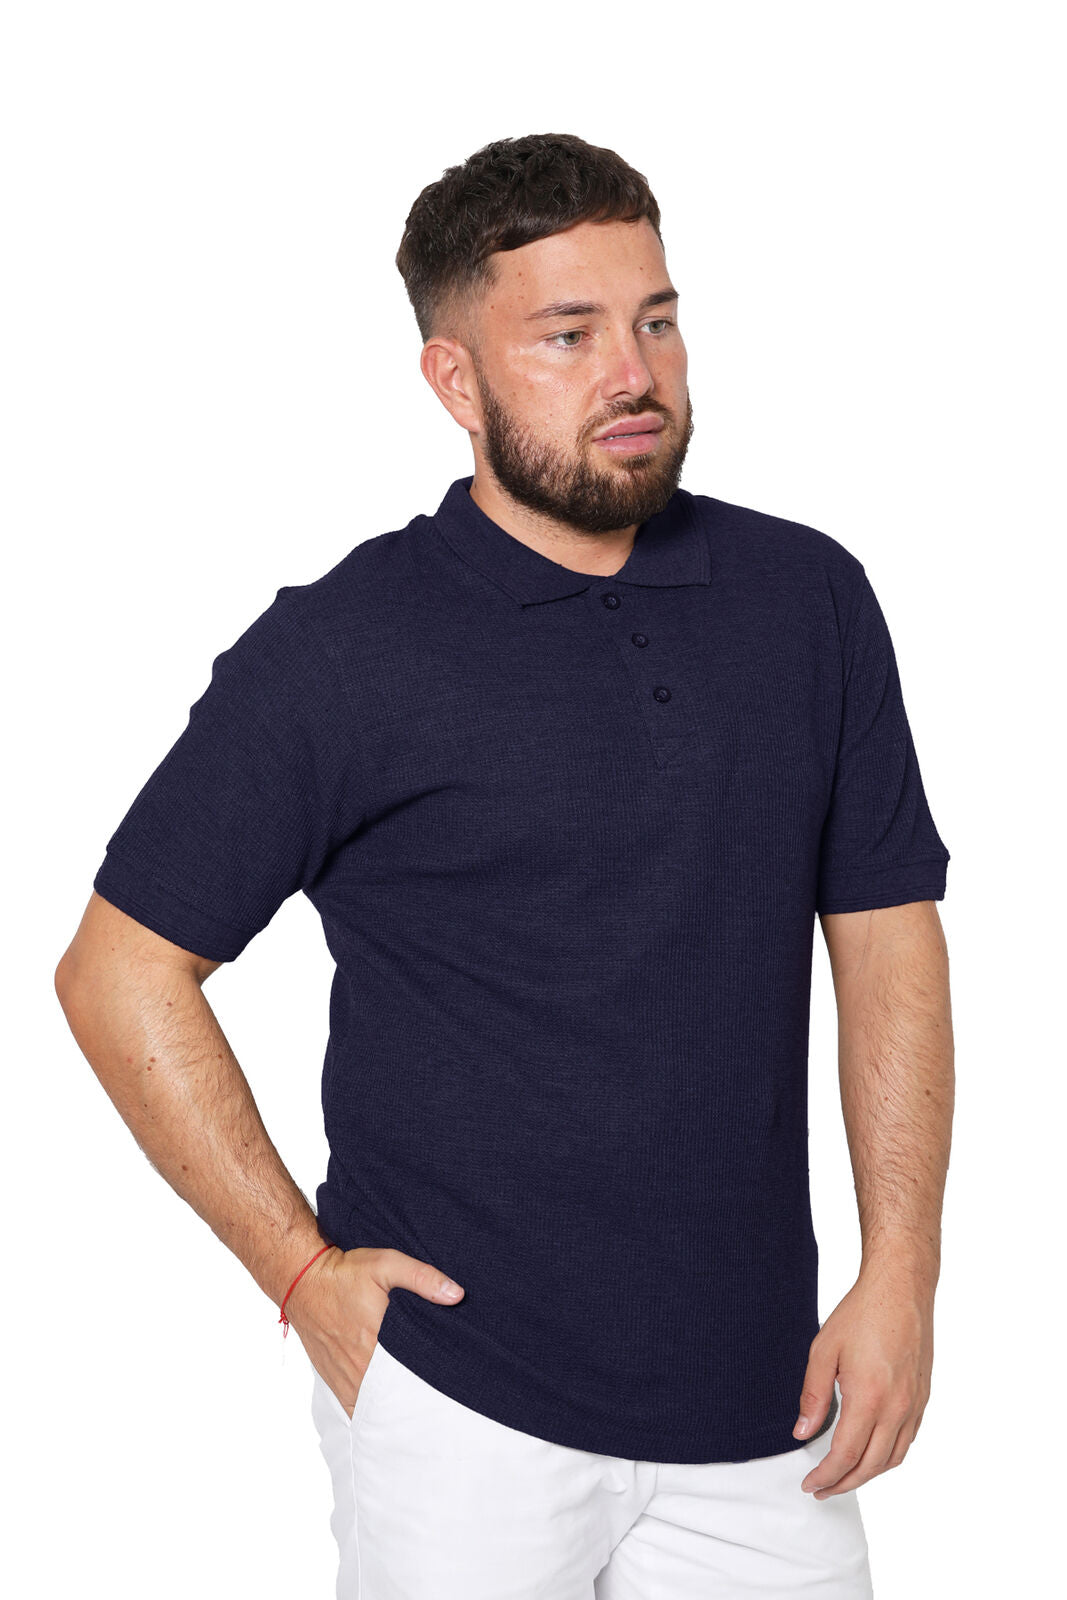 Men's Short Sleeve T-Shirt with 3 Buttons and Pique Polo Collar - Navy